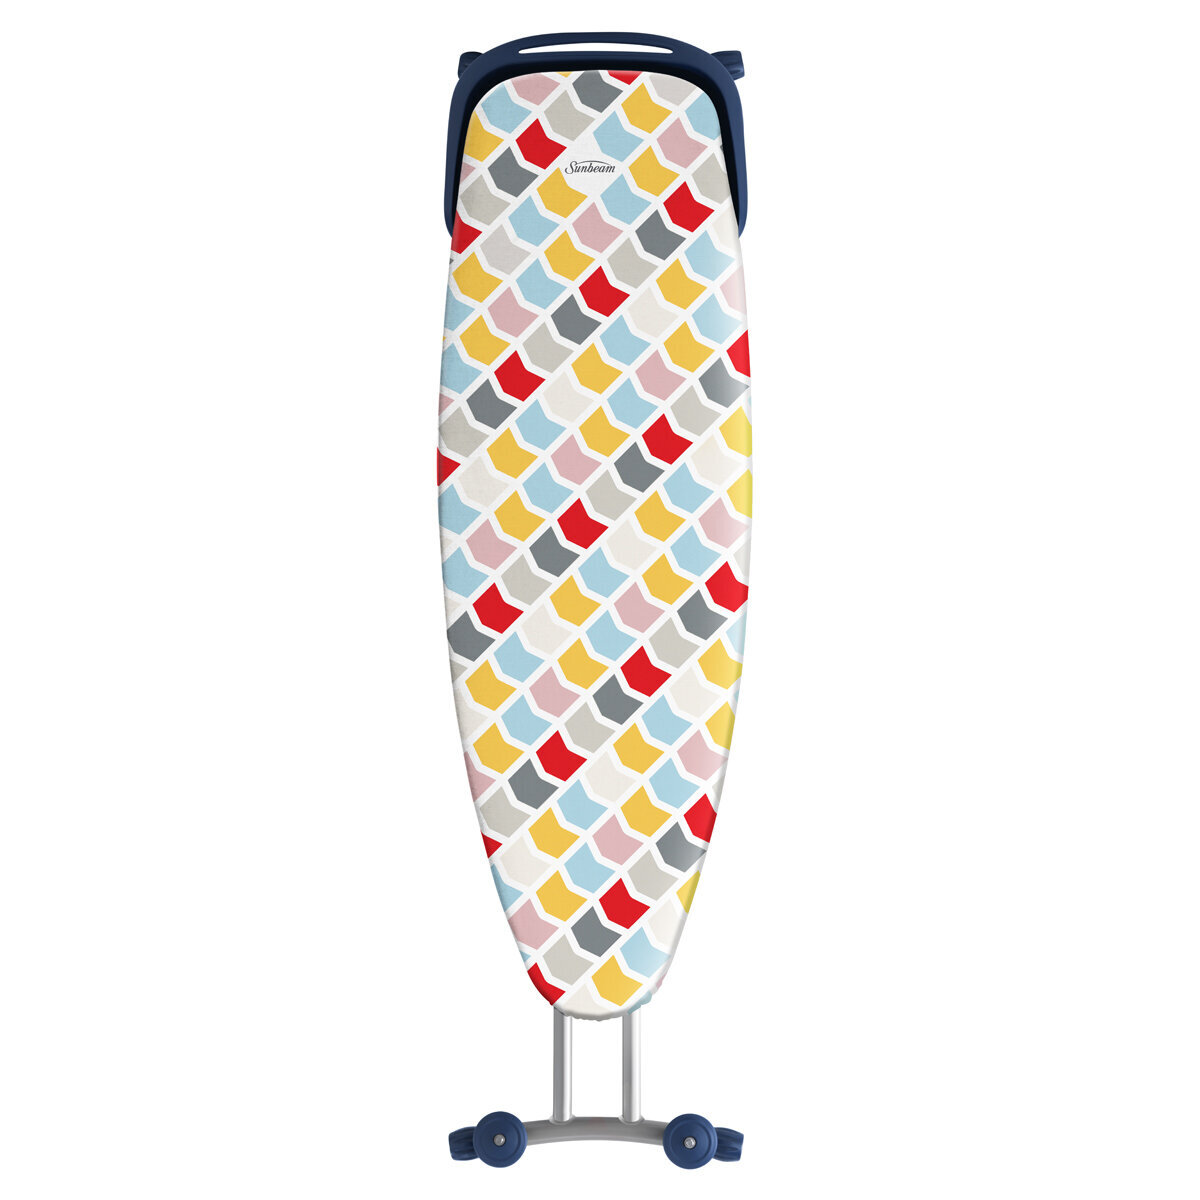 9d161eb80a95095e1fdd0269446729e5efaa1564 Sunbeam SB8400 Couture Ironing Board Front Cover high high